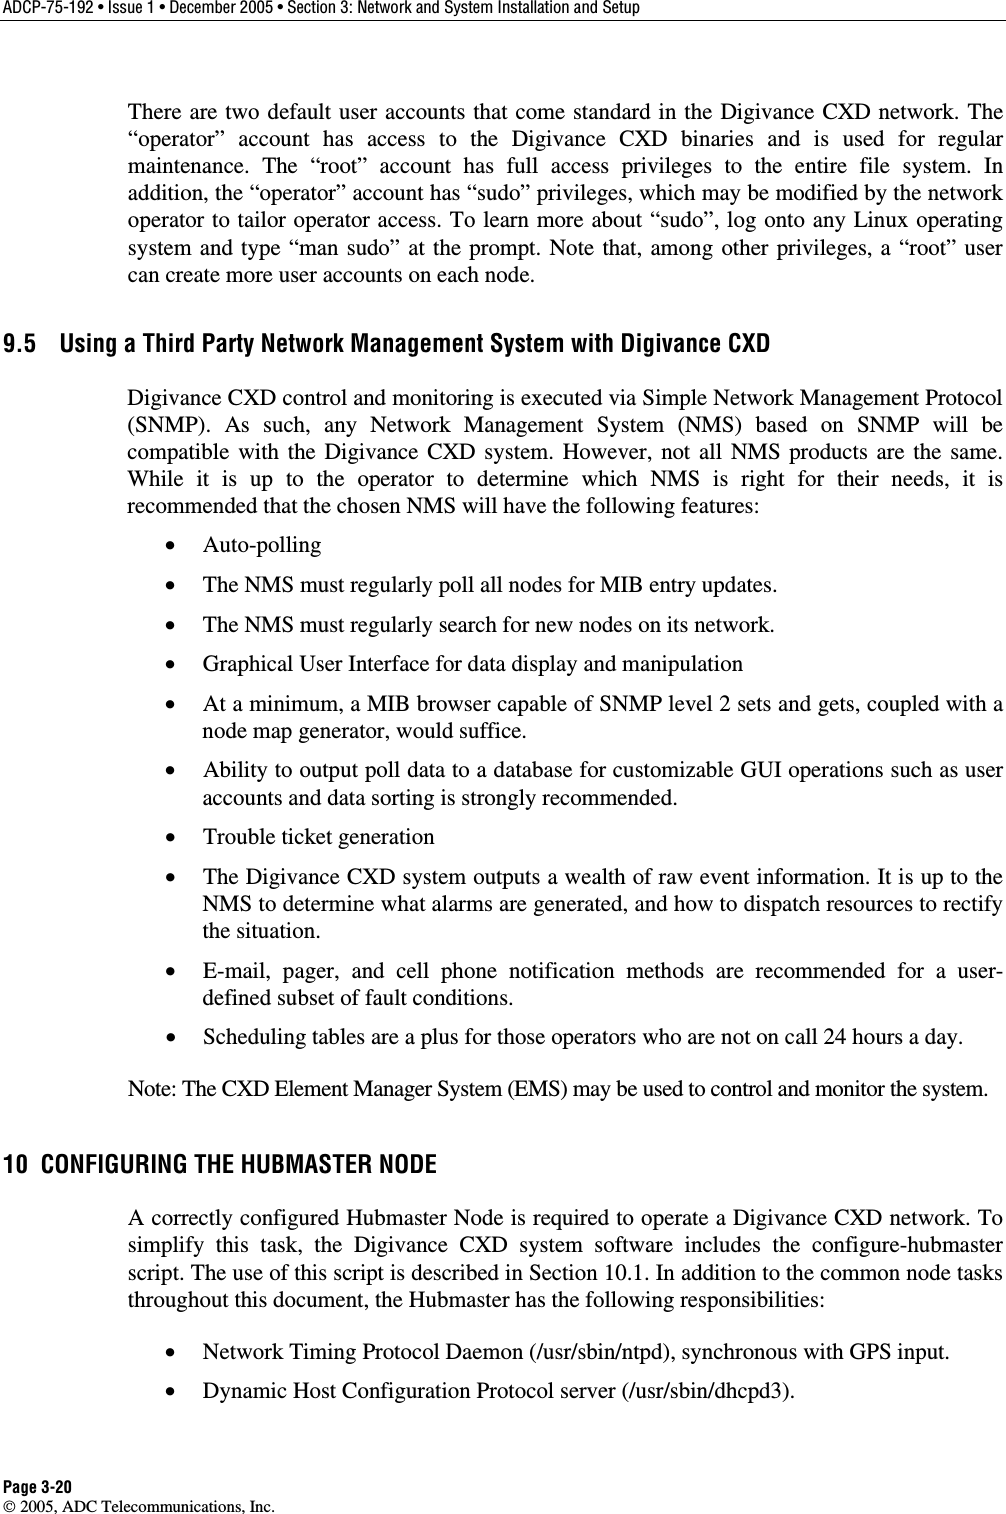 ADCP-75-192 • Issue 1 • December 2005 • Section 3: Network and System Installation and Setup Page 3-20  2005, ADC Telecommunications, Inc. There are two default user accounts that come standard in the Digivance CXD network. The “operator” account has access to the Digivance CXD binaries and is used for regular maintenance. The “root” account has full access privileges to the entire file system. In addition, the “operator” account has “sudo” privileges, which may be modified by the network operator to tailor operator access. To learn more about “sudo”, log onto any Linux operating system and type “man sudo” at the prompt. Note that, among other privileges, a “root” user can create more user accounts on each node. 9.5  Using a Third Party Network Management System with Digivance CXD Digivance CXD control and monitoring is executed via Simple Network Management Protocol (SNMP). As such, any Network Management System (NMS) based on SNMP will be compatible with the Digivance CXD system. However, not all NMS products are the same. While it is up to the operator to determine which NMS is right for their needs, it is recommended that the chosen NMS will have the following features: •  Auto-polling •  The NMS must regularly poll all nodes for MIB entry updates. •  The NMS must regularly search for new nodes on its network. •  Graphical User Interface for data display and manipulation •  At a minimum, a MIB browser capable of SNMP level 2 sets and gets, coupled with a node map generator, would suffice. •  Ability to output poll data to a database for customizable GUI operations such as user accounts and data sorting is strongly recommended. •  Trouble ticket generation •  The Digivance CXD system outputs a wealth of raw event information. It is up to the NMS to determine what alarms are generated, and how to dispatch resources to rectify the situation.  •  E-mail, pager, and cell phone notification methods are recommended for a user-defined subset of fault conditions.  •  Scheduling tables are a plus for those operators who are not on call 24 hours a day. Note: The CXD Element Manager System (EMS) may be used to control and monitor the system. 10  CONFIGURING THE HUBMASTER NODE A correctly configured Hubmaster Node is required to operate a Digivance CXD network. To simplify this task, the Digivance CXD system software includes the configure-hubmaster script. The use of this script is described in Section 10.1. In addition to the common node tasks throughout this document, the Hubmaster has the following responsibilities: •  Network Timing Protocol Daemon (/usr/sbin/ntpd), synchronous with GPS input. •  Dynamic Host Configuration Protocol server (/usr/sbin/dhcpd3). 